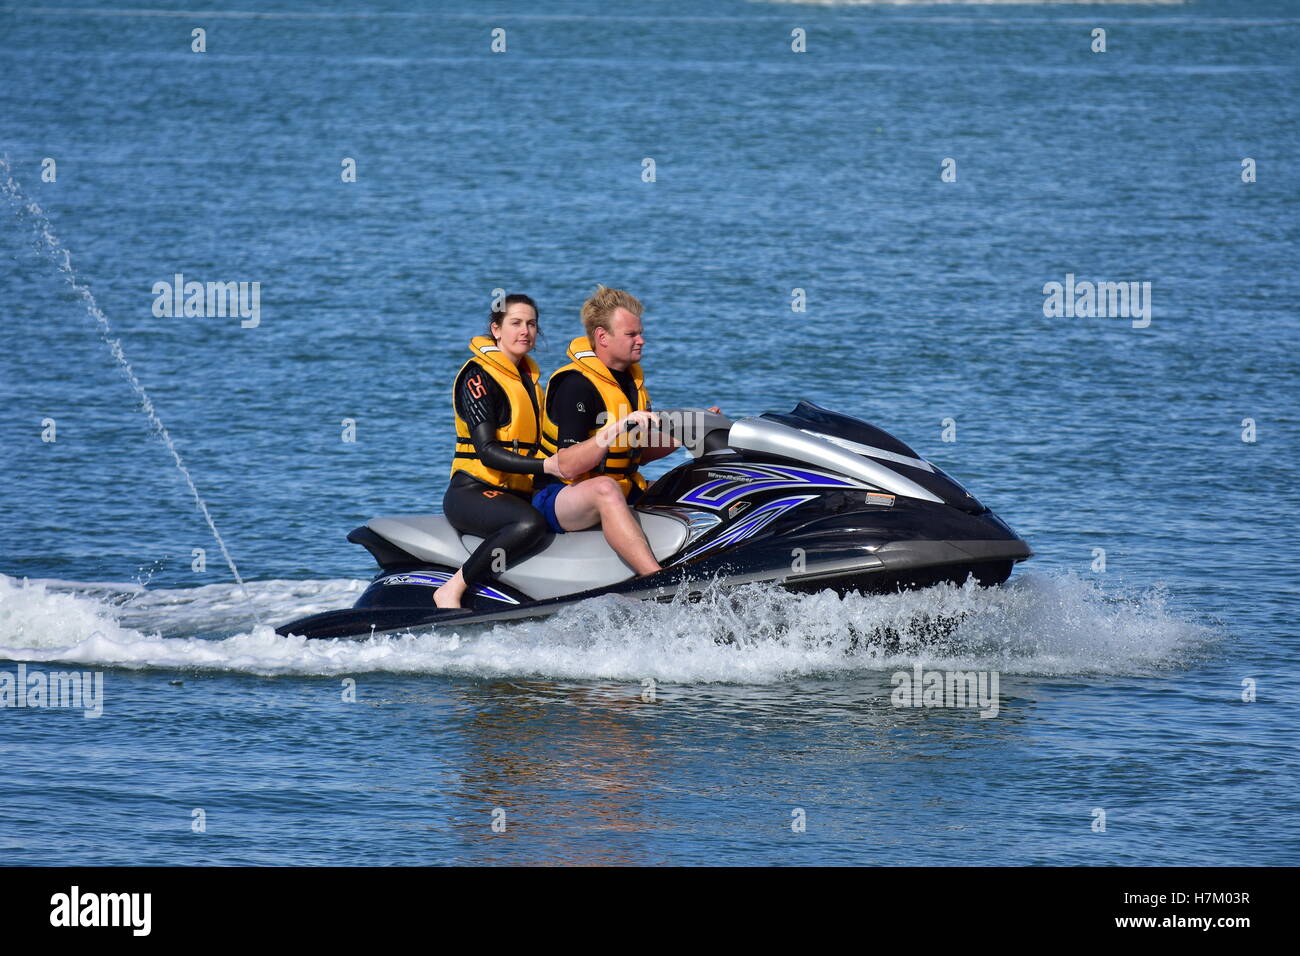 A couple in yellow lifejackets on a jetski Stock Photo